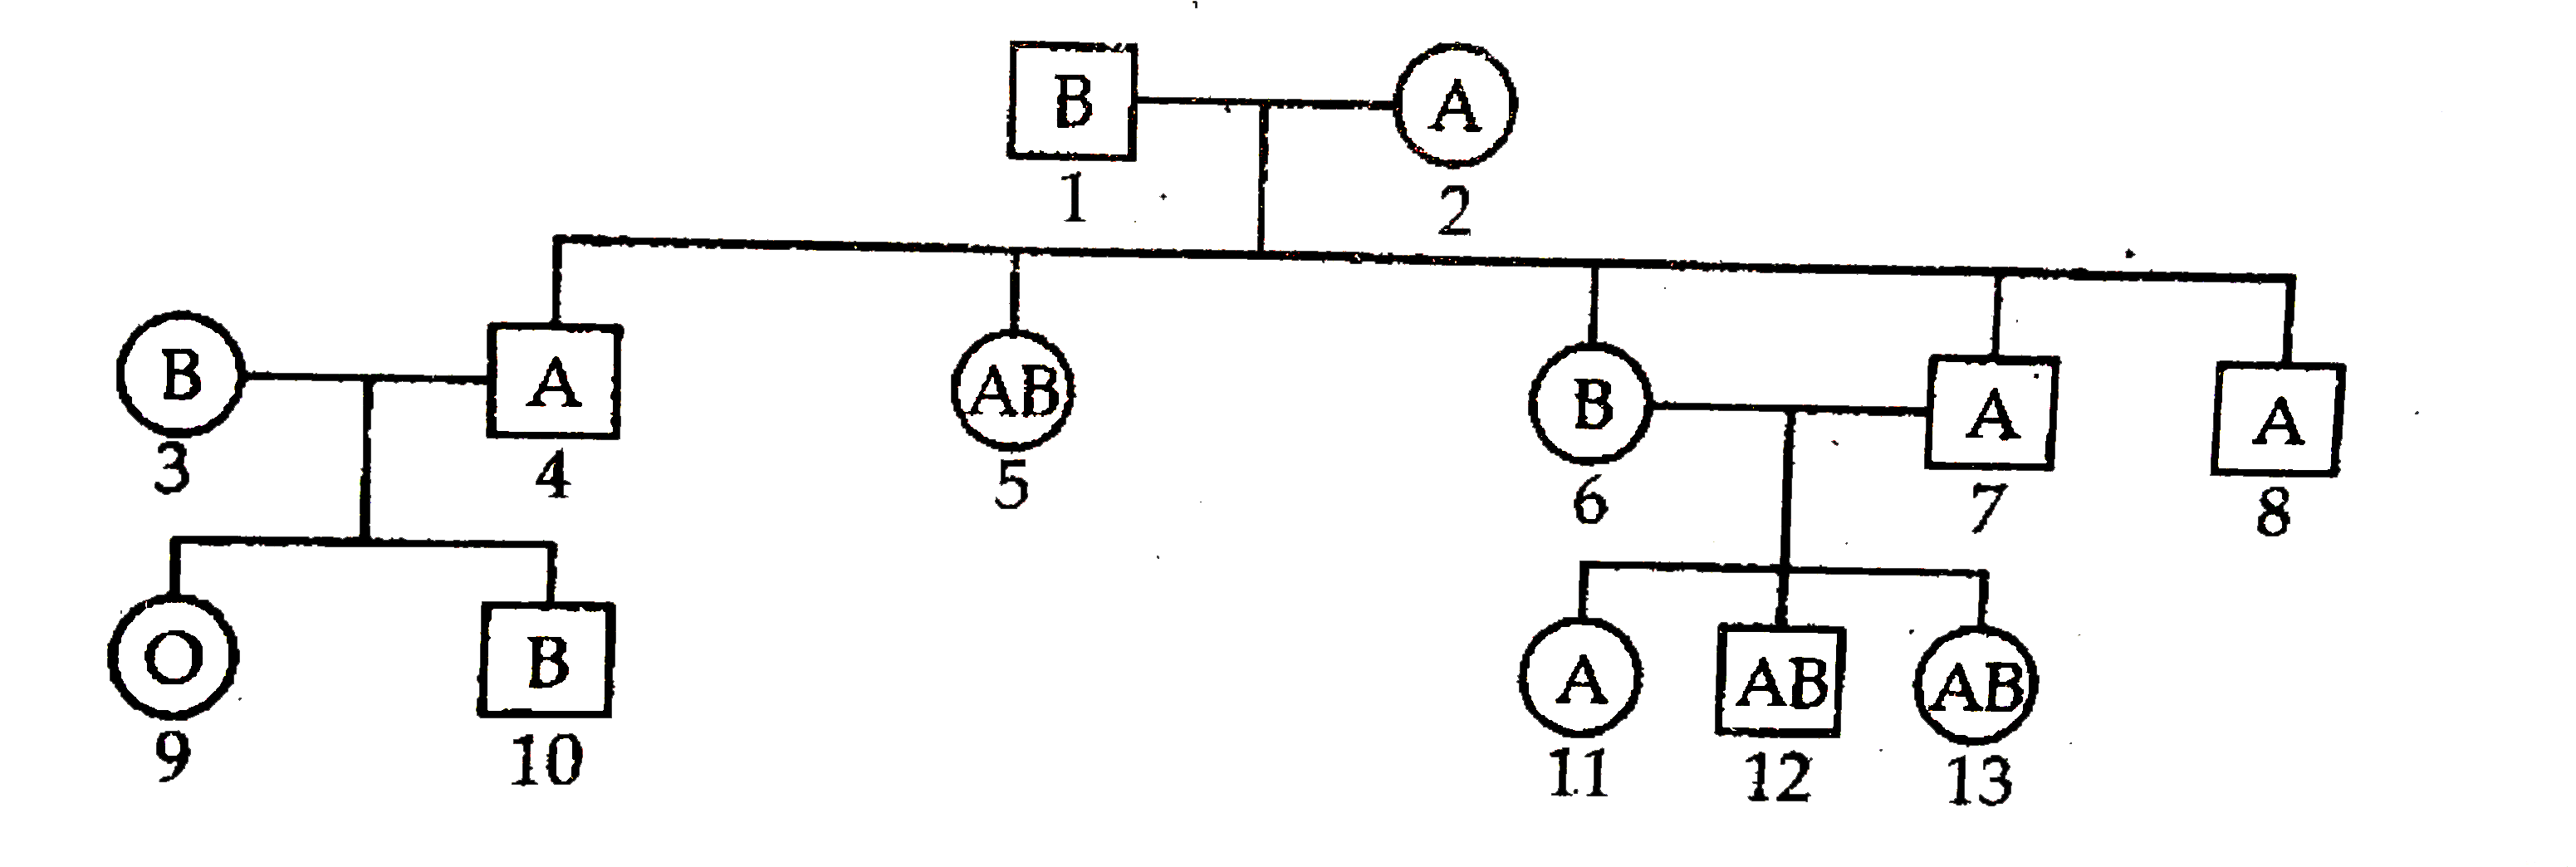 study-the-pedigree-chart-given-showing-the-inheritance-pattern-of